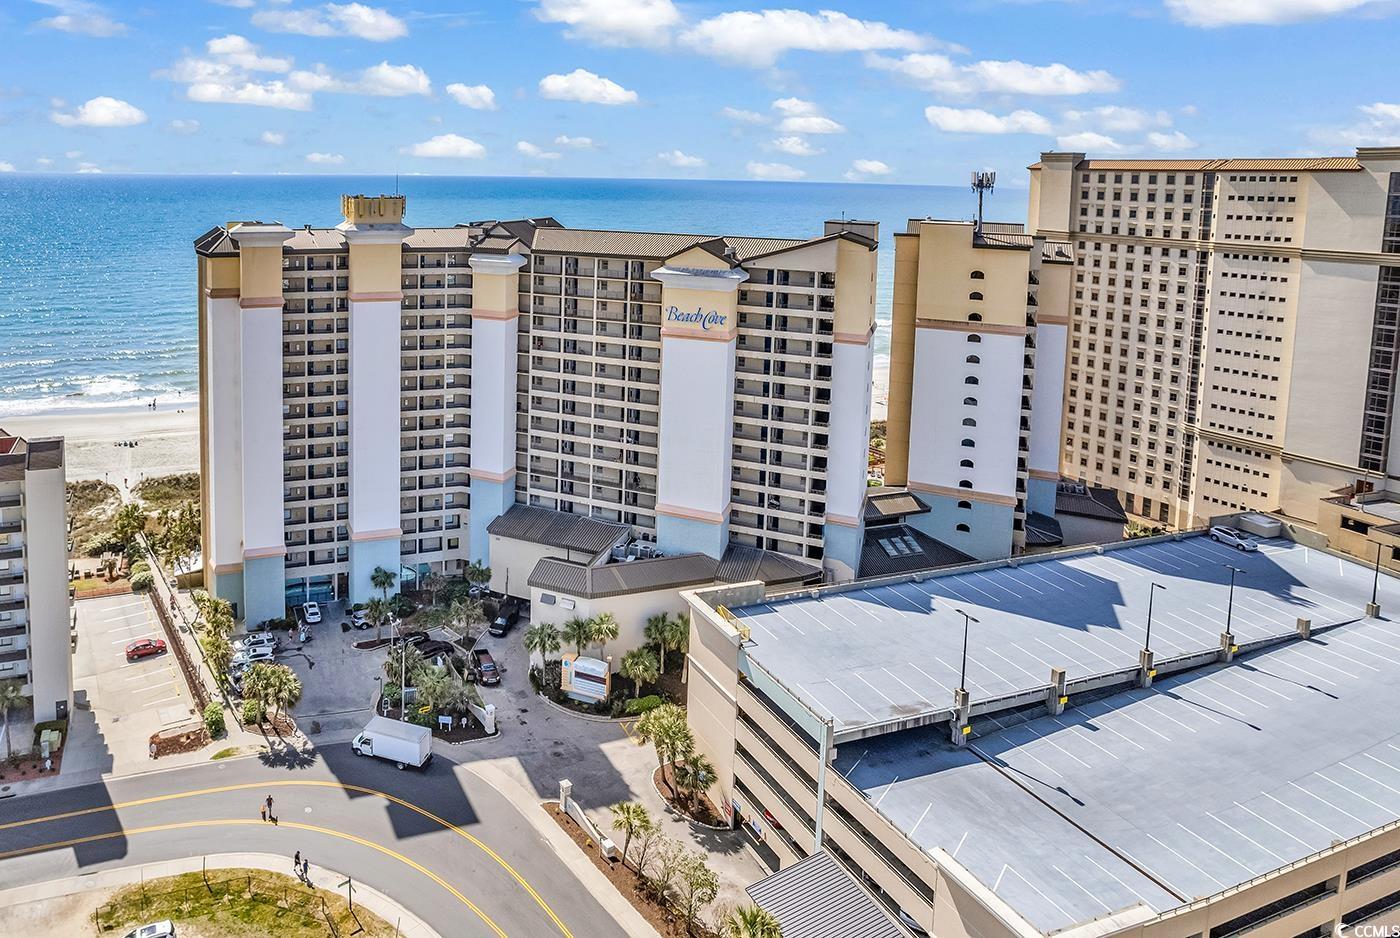 well maintained one-bedroom direct oceanfront condo at beach cove in north myrtle beach. this furnished 4th floor unit has exceptional views but also plenty of updated features inside such as an updated kitchen with granite countertops, tile backsplash, upgraded flooring in the living room and bedroom, and a shower that was just renovated. this luxurious resort offers three outdoor pools, an indoor pool, a hot tub, a game room, an onsite bar and grill, and immaculate landscaping. beach cove is located close to barefoot landing, tanger outlets, plenty of restaurants, attractions, and more! schedule a showing today!